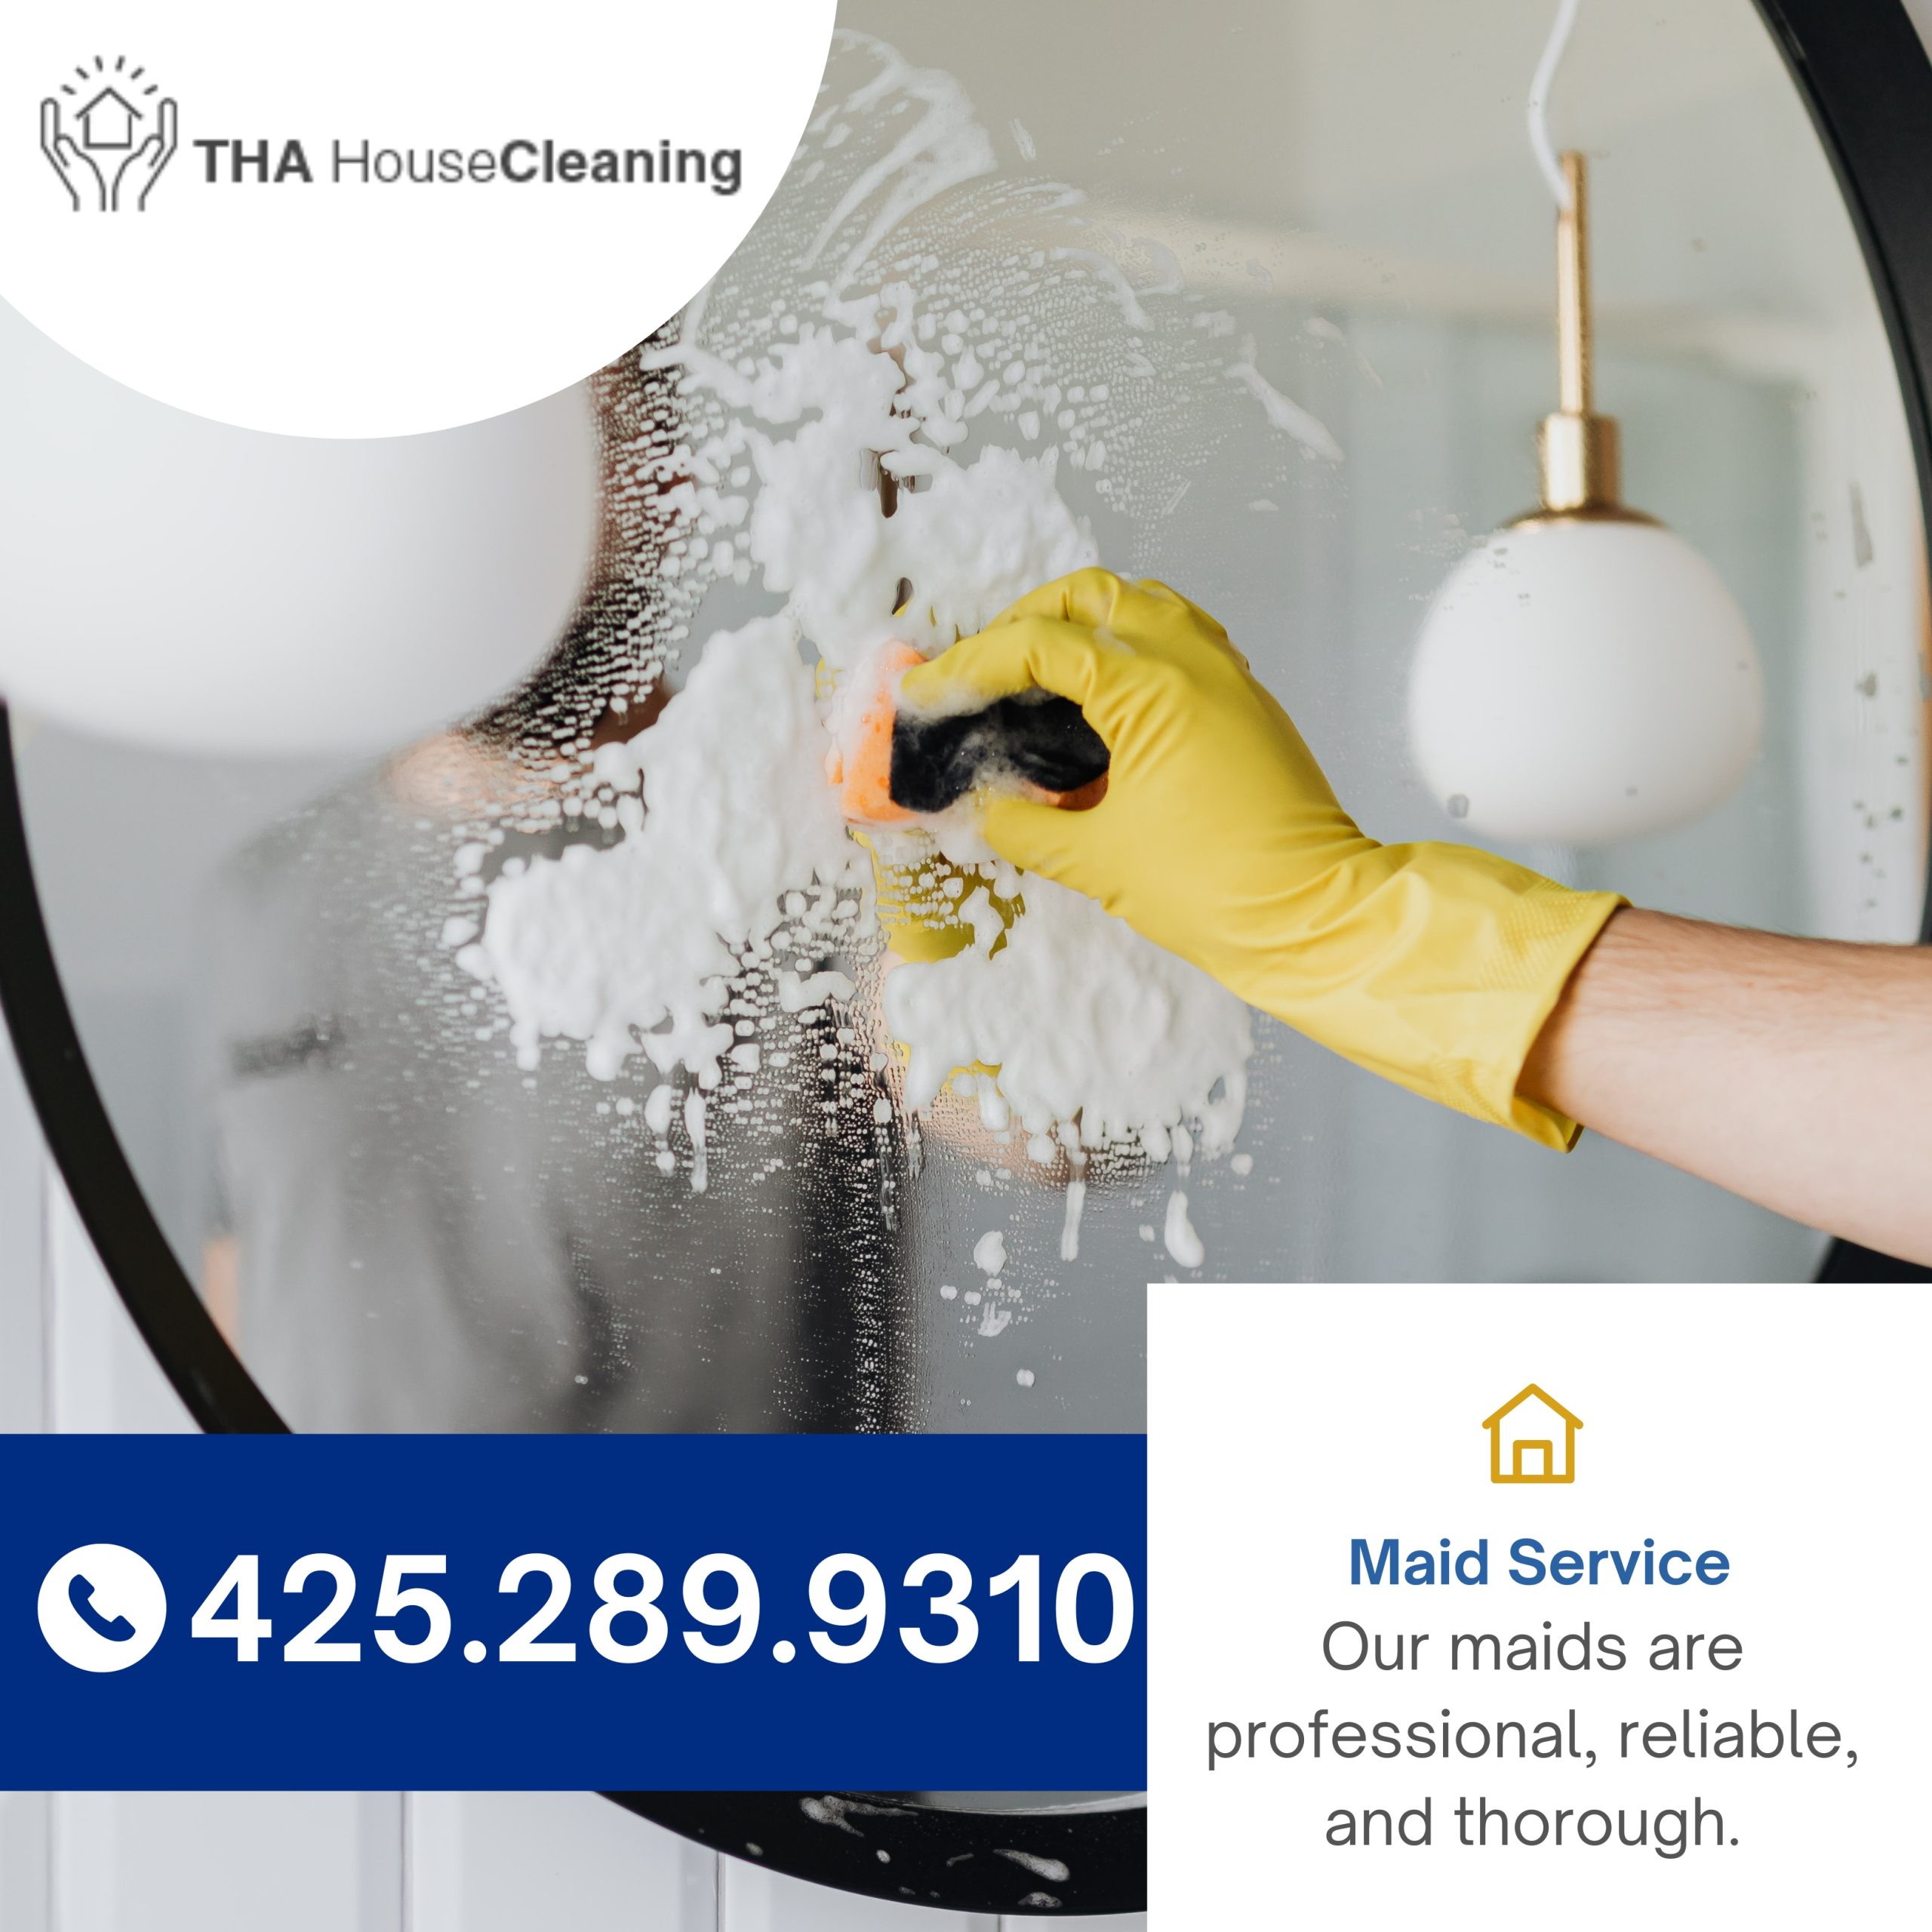 Hire THA House Cleaning Services in Renton, WA, USA